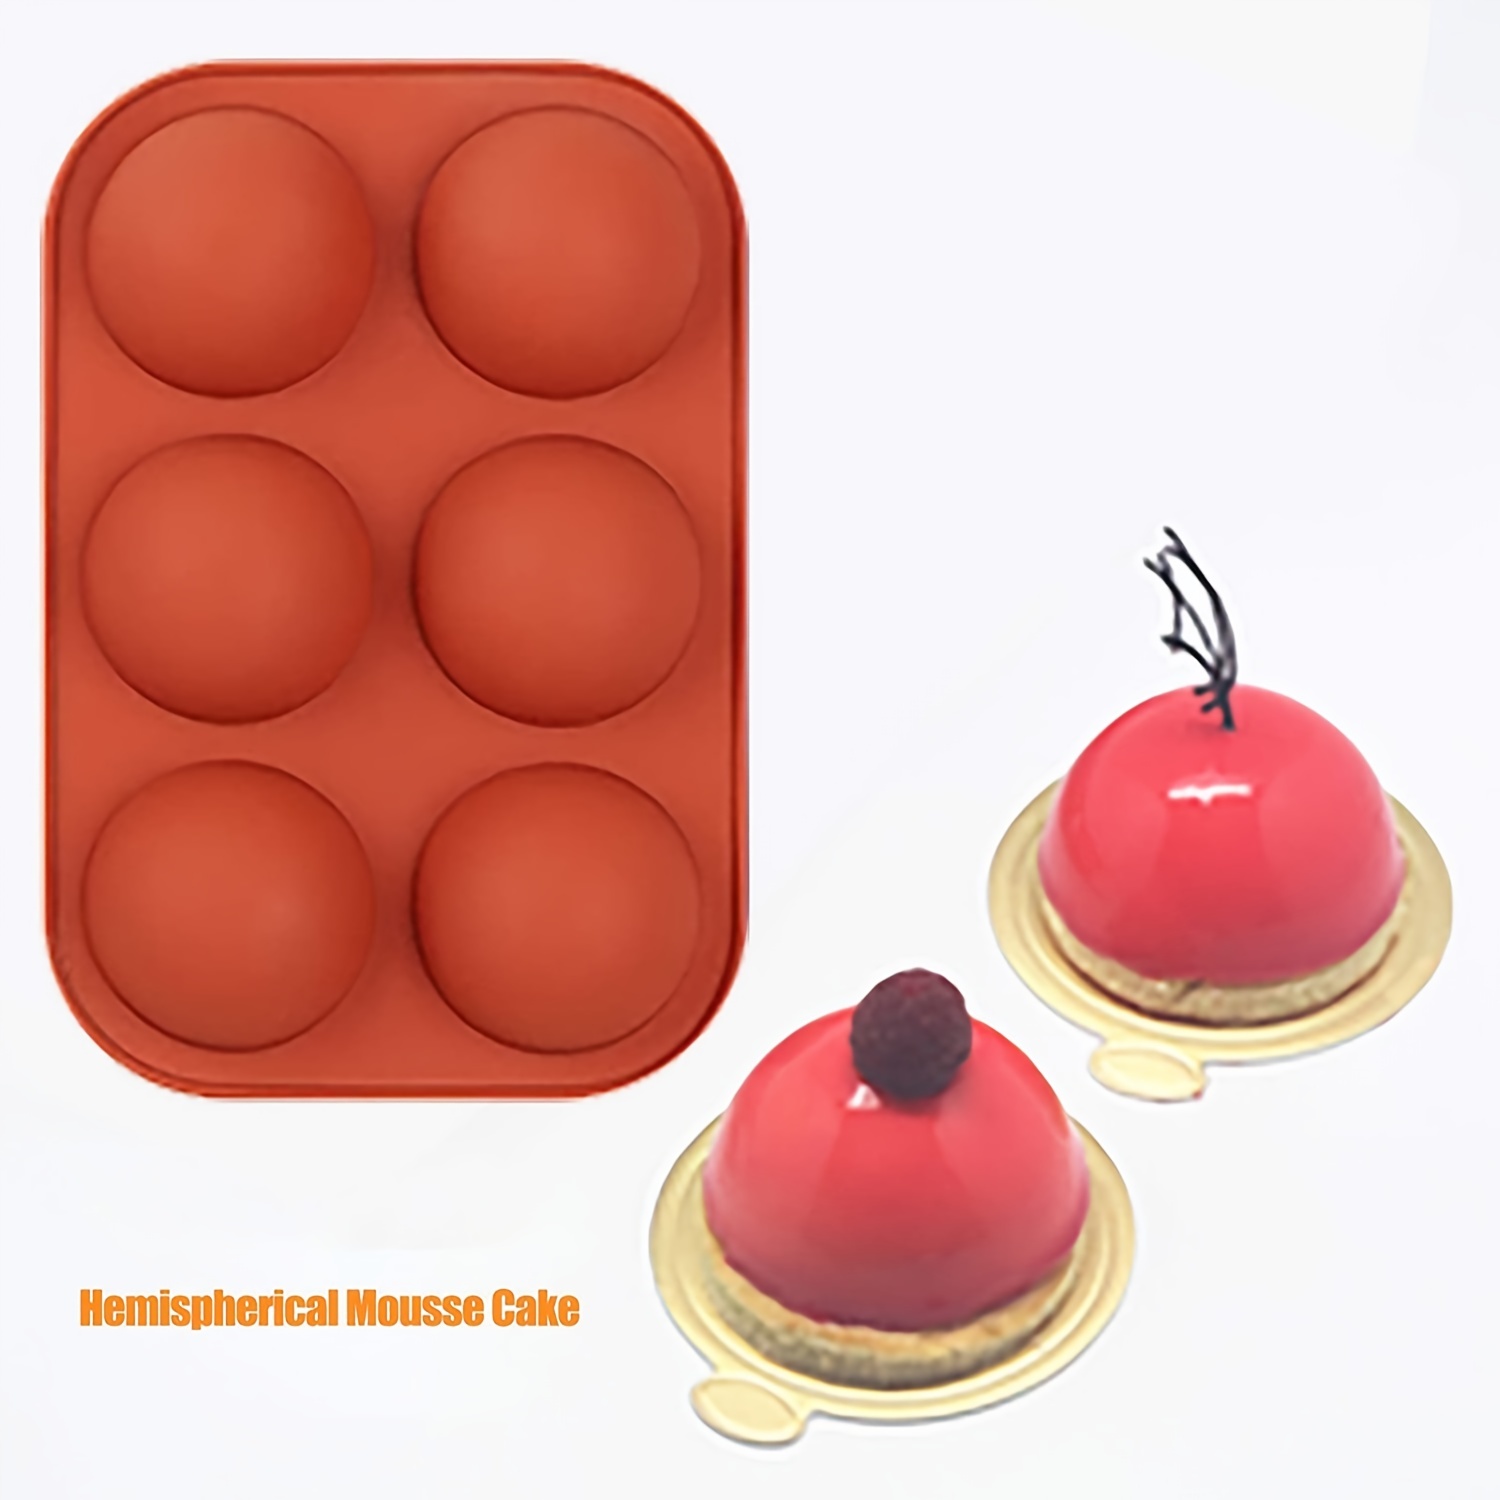 Snowflake Silicone Mold 6 Packs Baking Mold for Making Hot Chocolate Bomb  Cake Jelly Dome Mousse red 3 